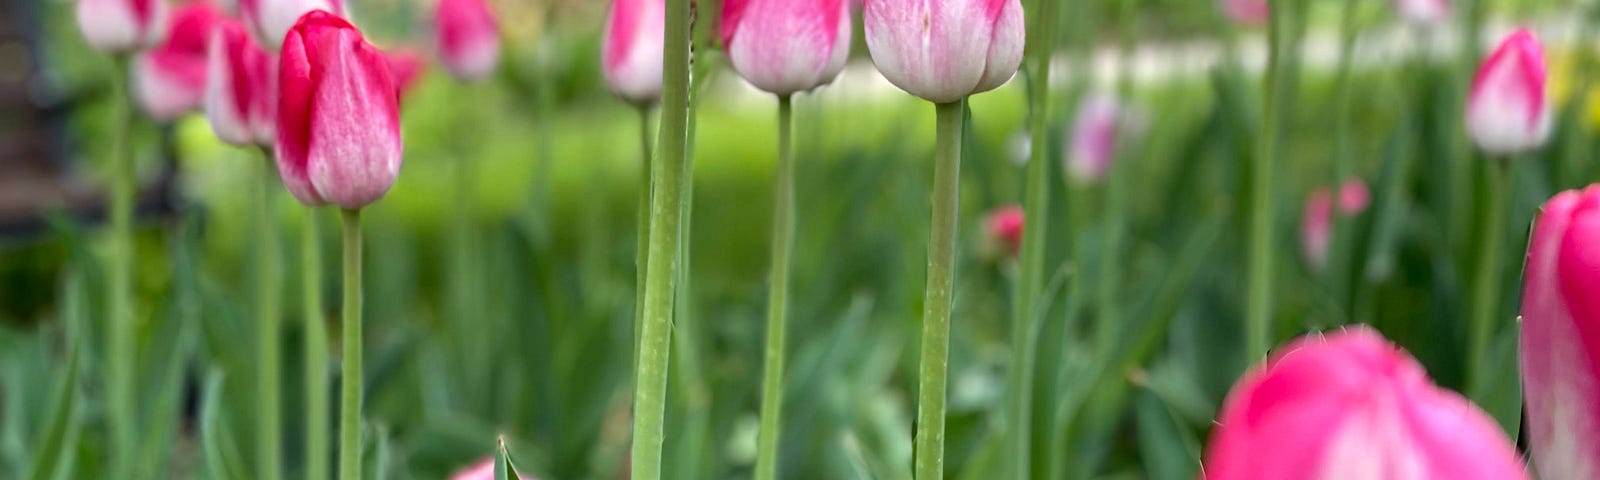 Lovely pink with white tulips pictured from the bottom looking up.